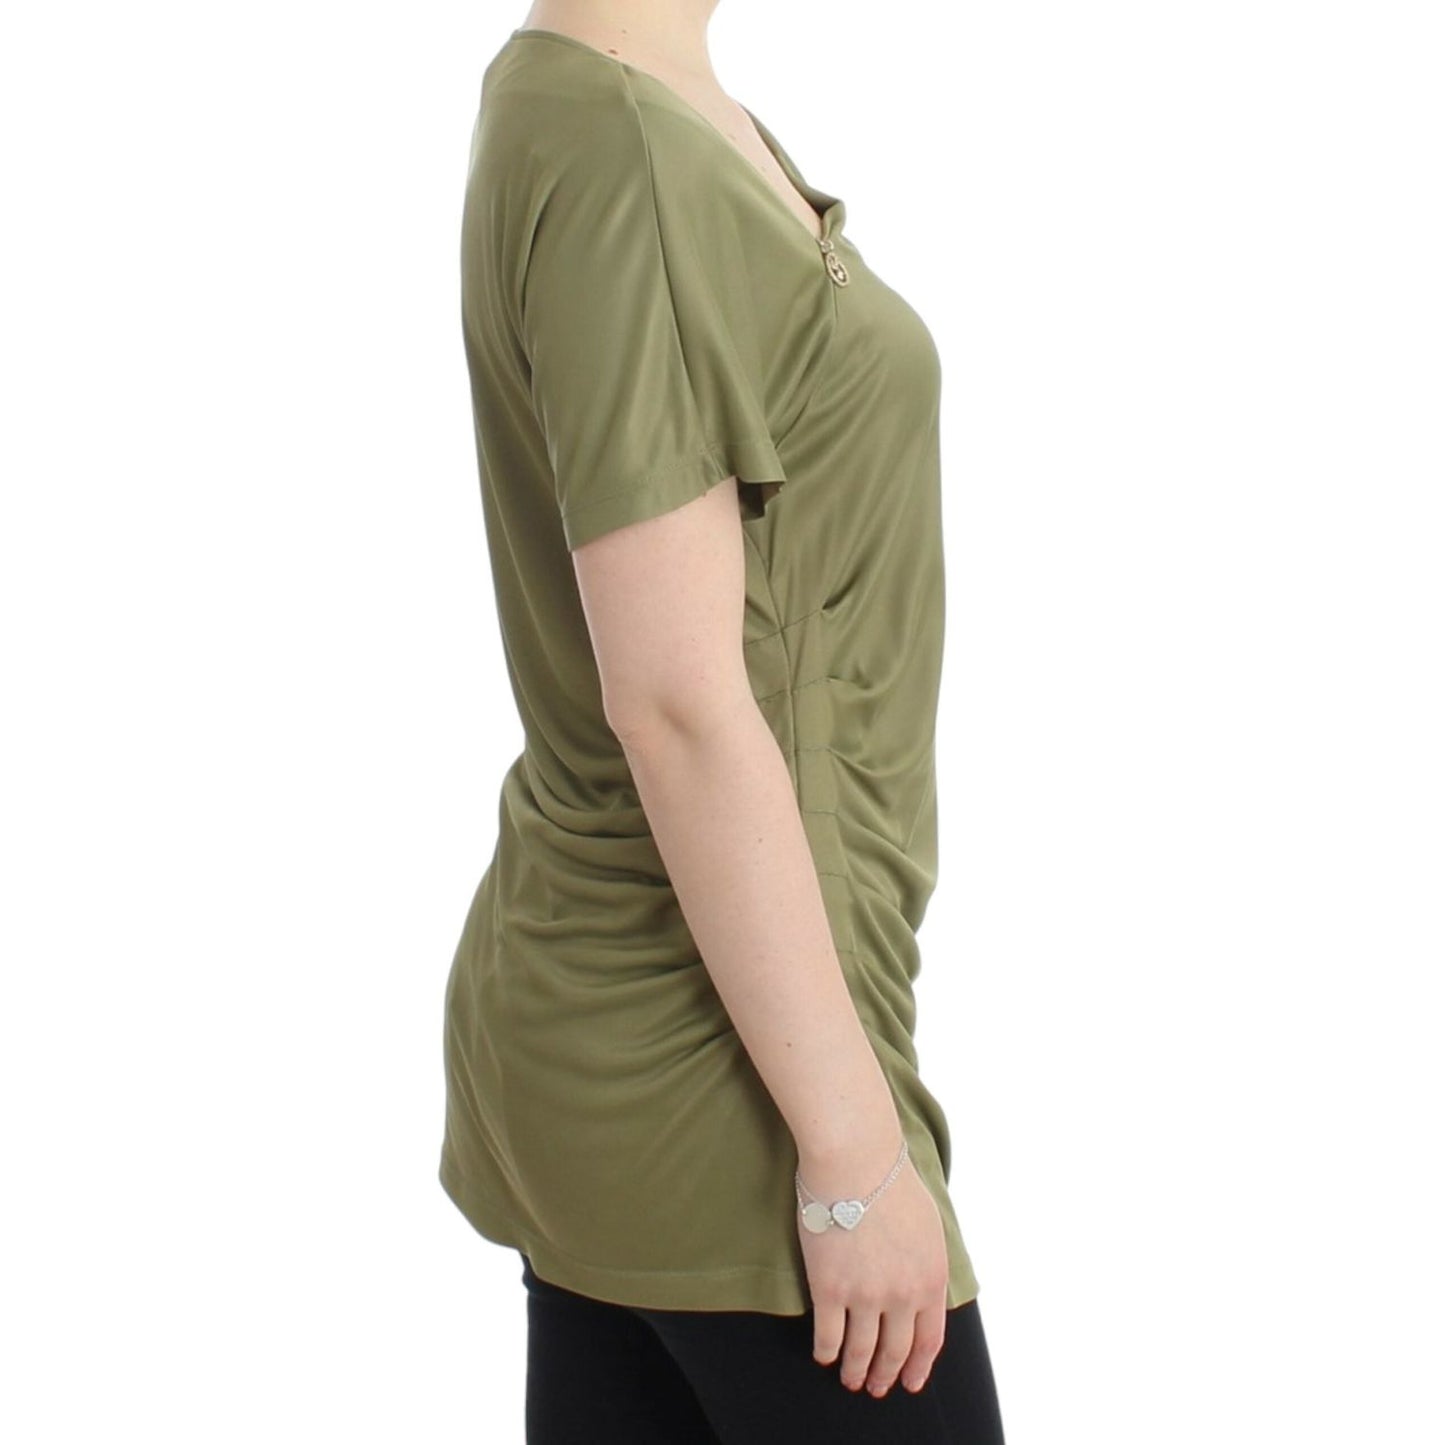 Cavalli Elegant Green Jersey Blouse with Gold Accents green-blouse-top 9527-green-blouse-top-3-scaled-80f569a1-d03.jpg